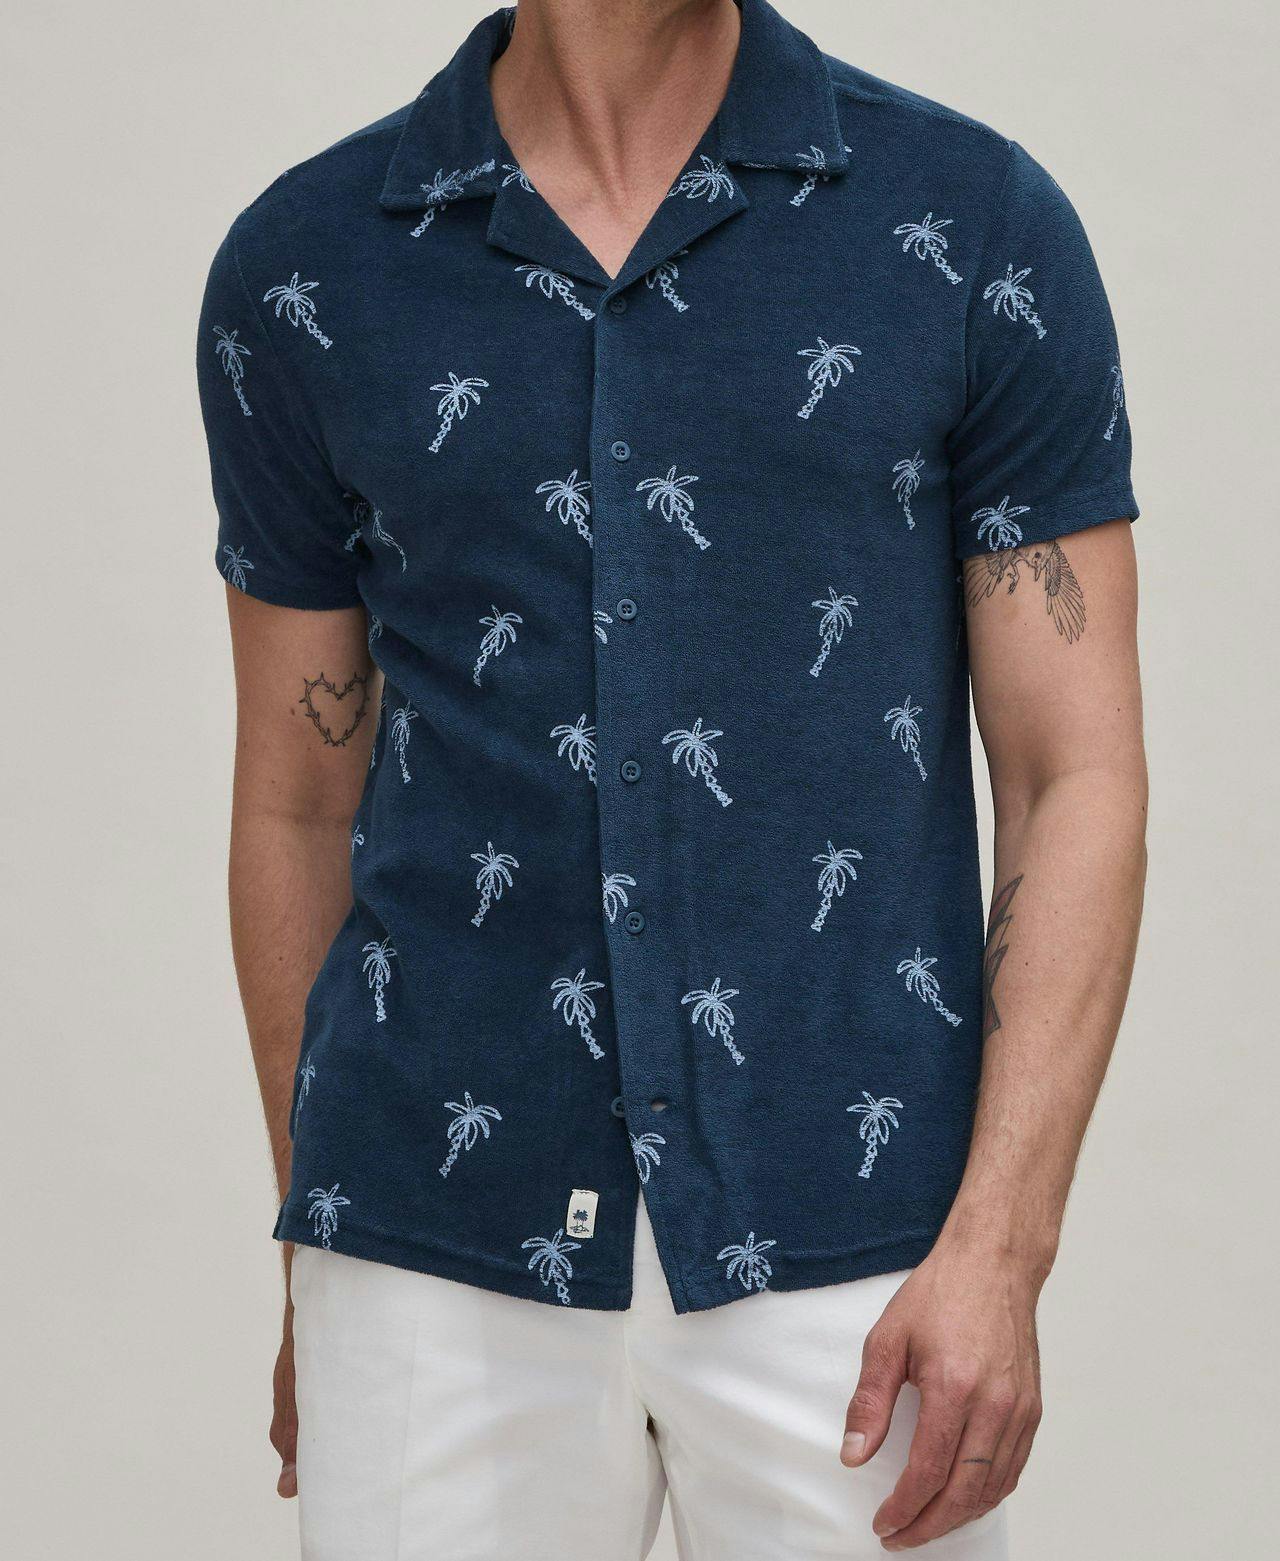 male model in palm tree printed sport shirt